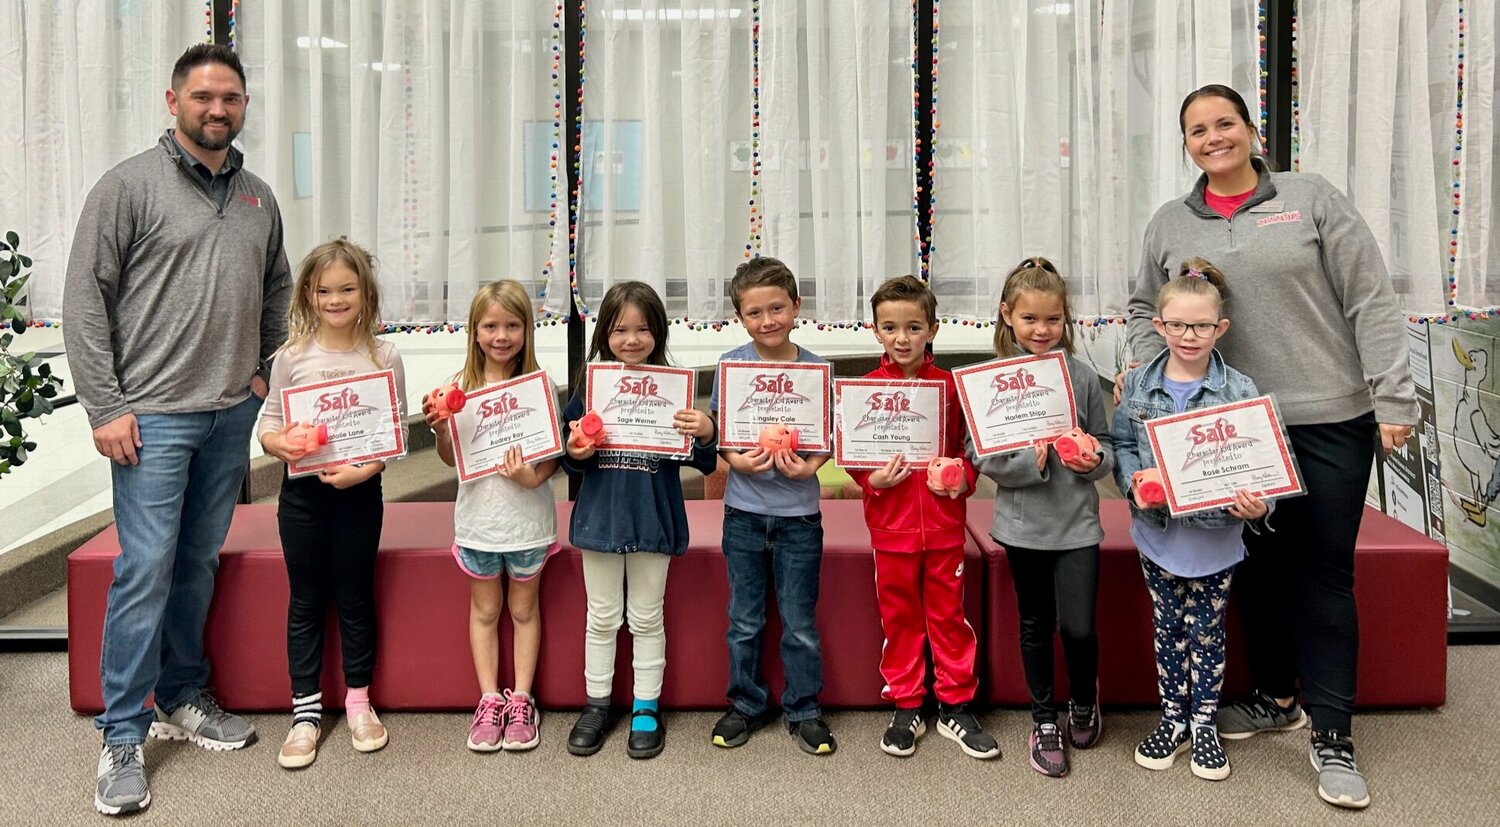 Officials with West Plains R-7 School District and sponsor Community First Banking Company congratulate West Plains Elementary first grade “Safe Character" kids of the month. From left: Community First representative Daniel McKinney; students Natalie Lane, Audrey Ray, Sage Werner, Kingsley Cale, Cash Young, Harlem Shipp and Rose Schram; and Assistant Principal Virginia Uphaus.